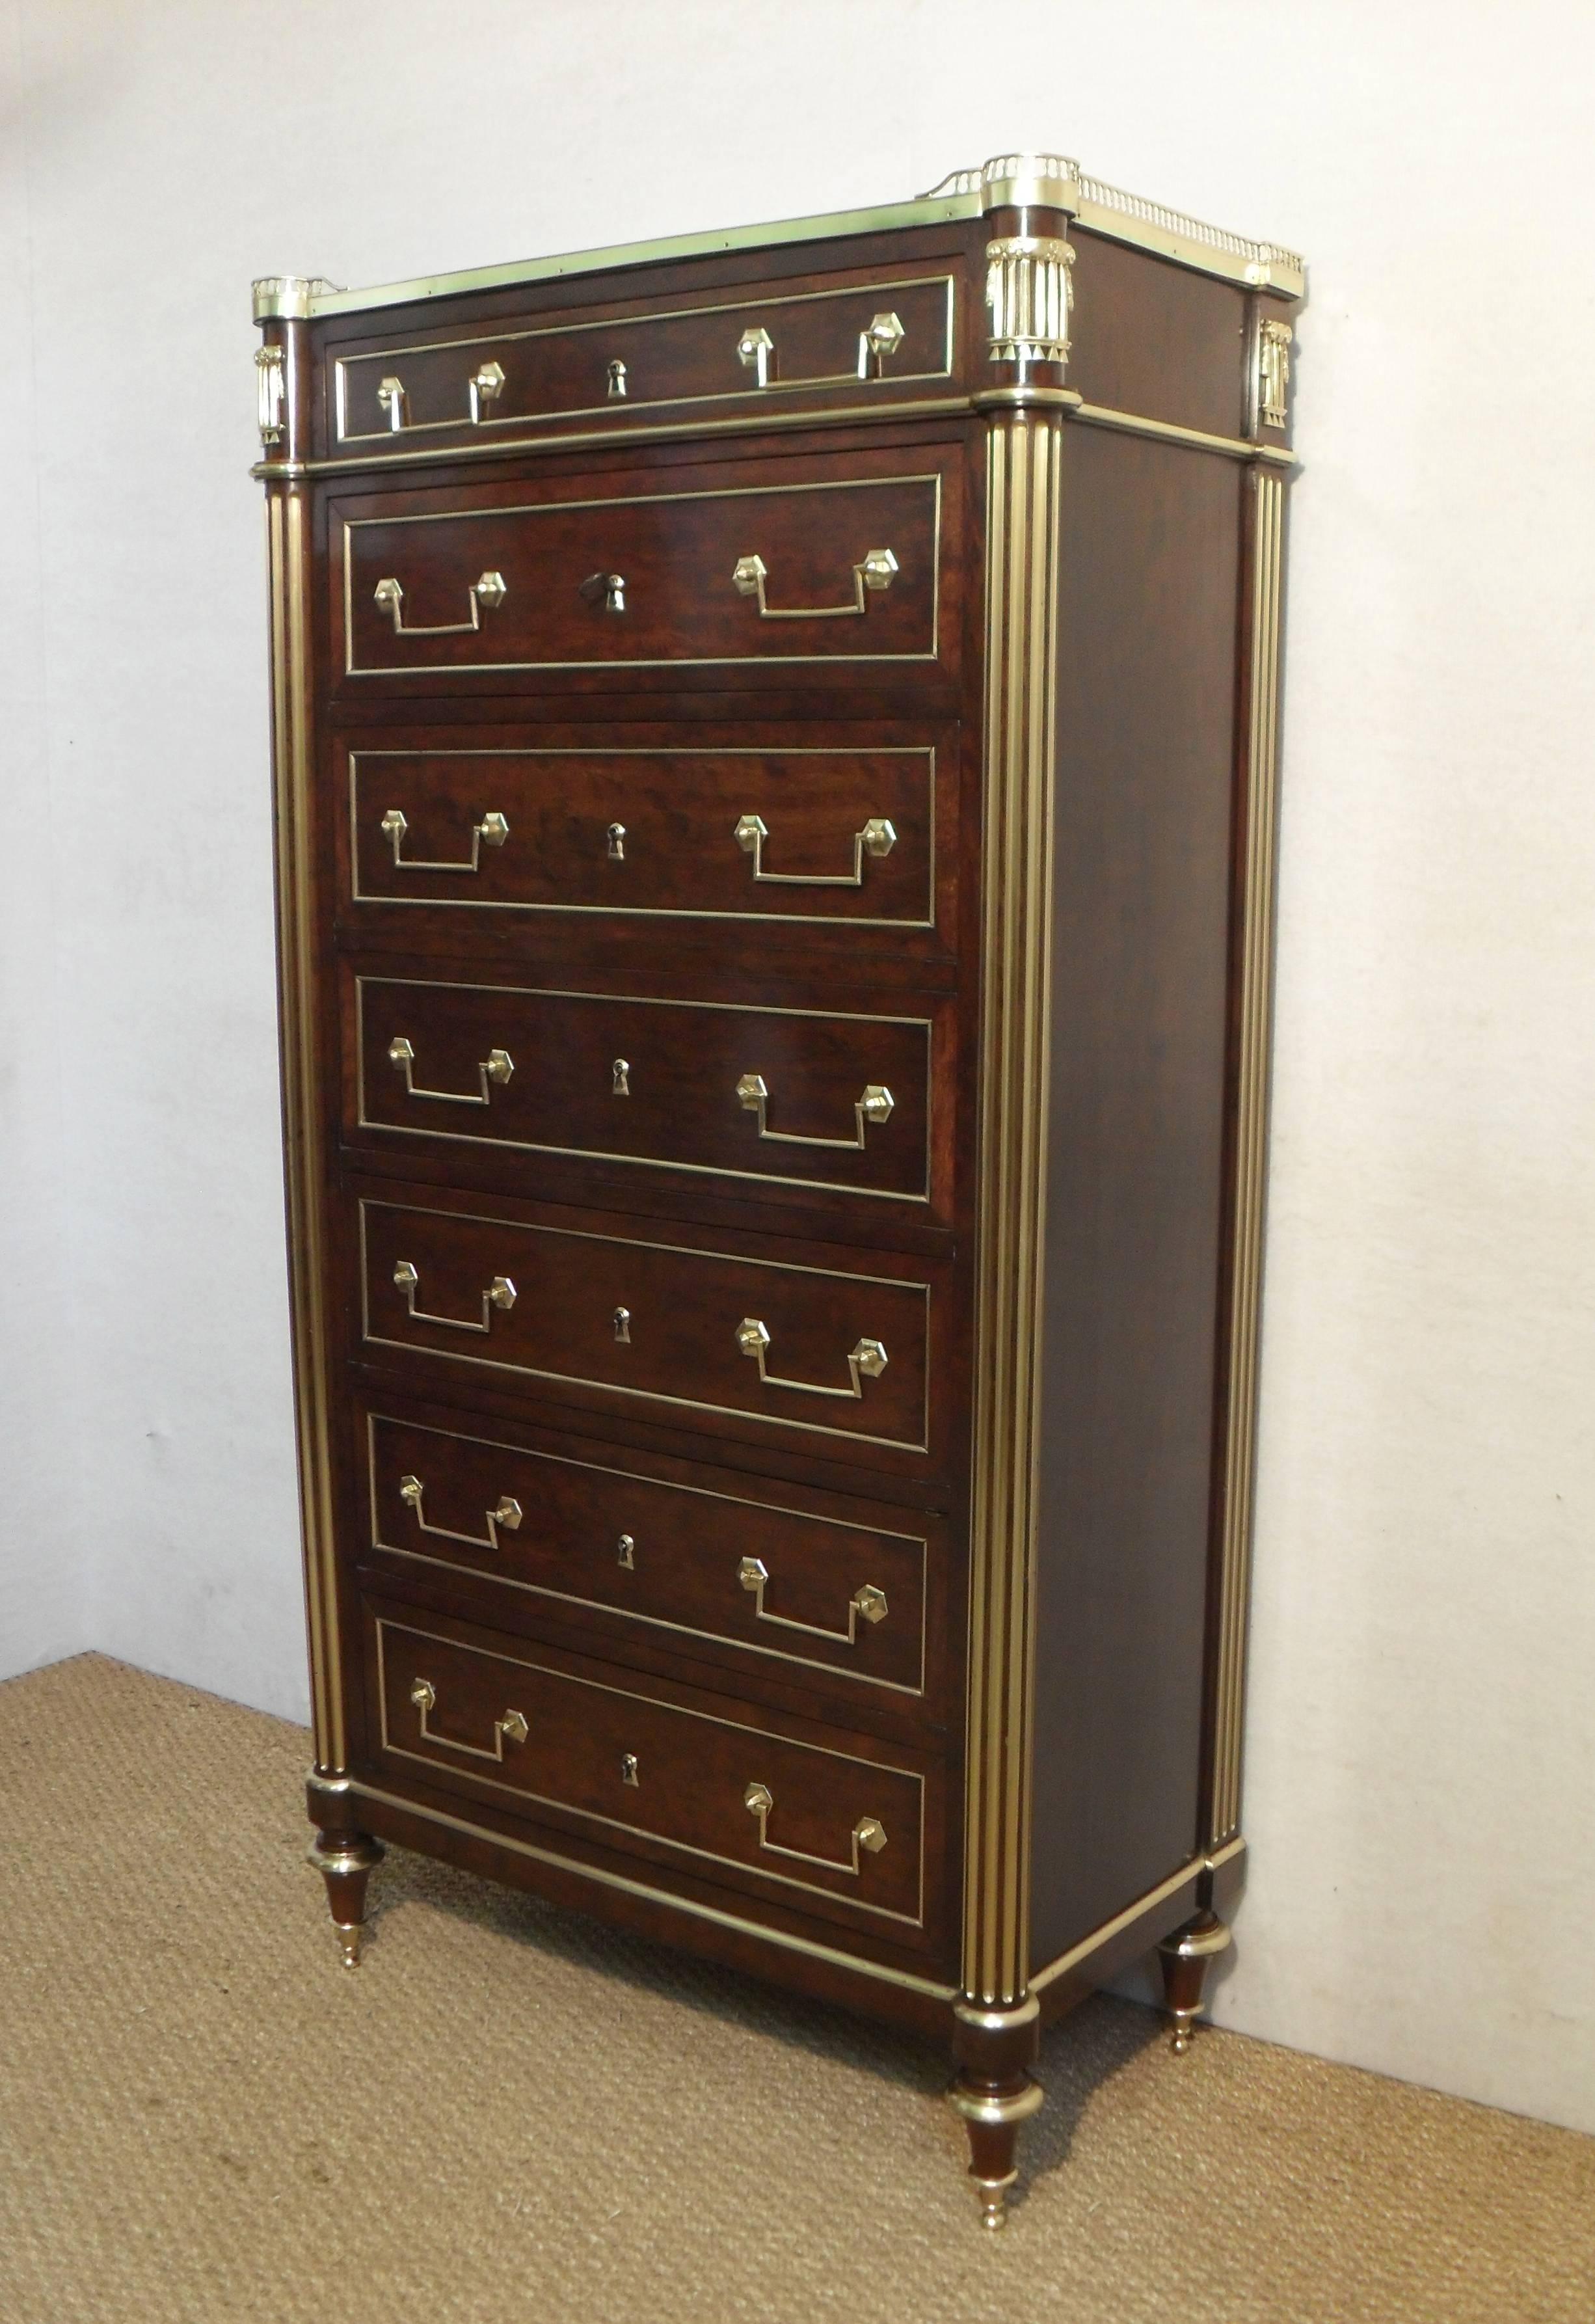 A fantastic quality French tallboy or chest of drawers with beautiful plum pudding figured mahogany veneers. The chest has four fluted brass inlaid columns and turned vase shaped feet. The drawer fronts have inset panels with quarter brass mouldings